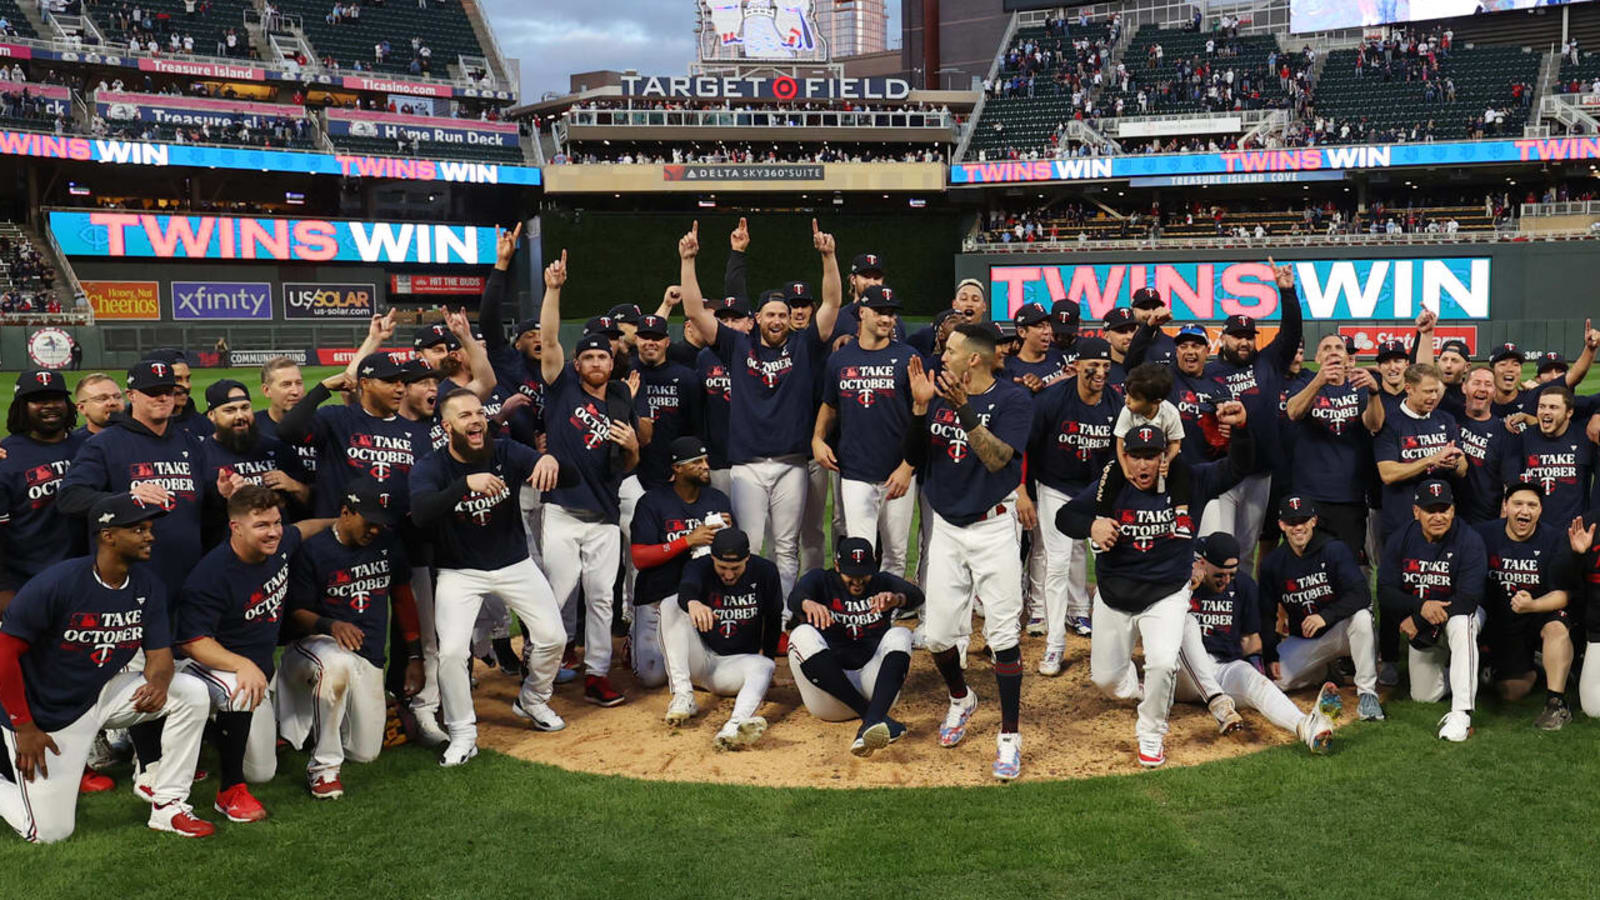 Twins avoid tying dubious record with series win over Blue Jays